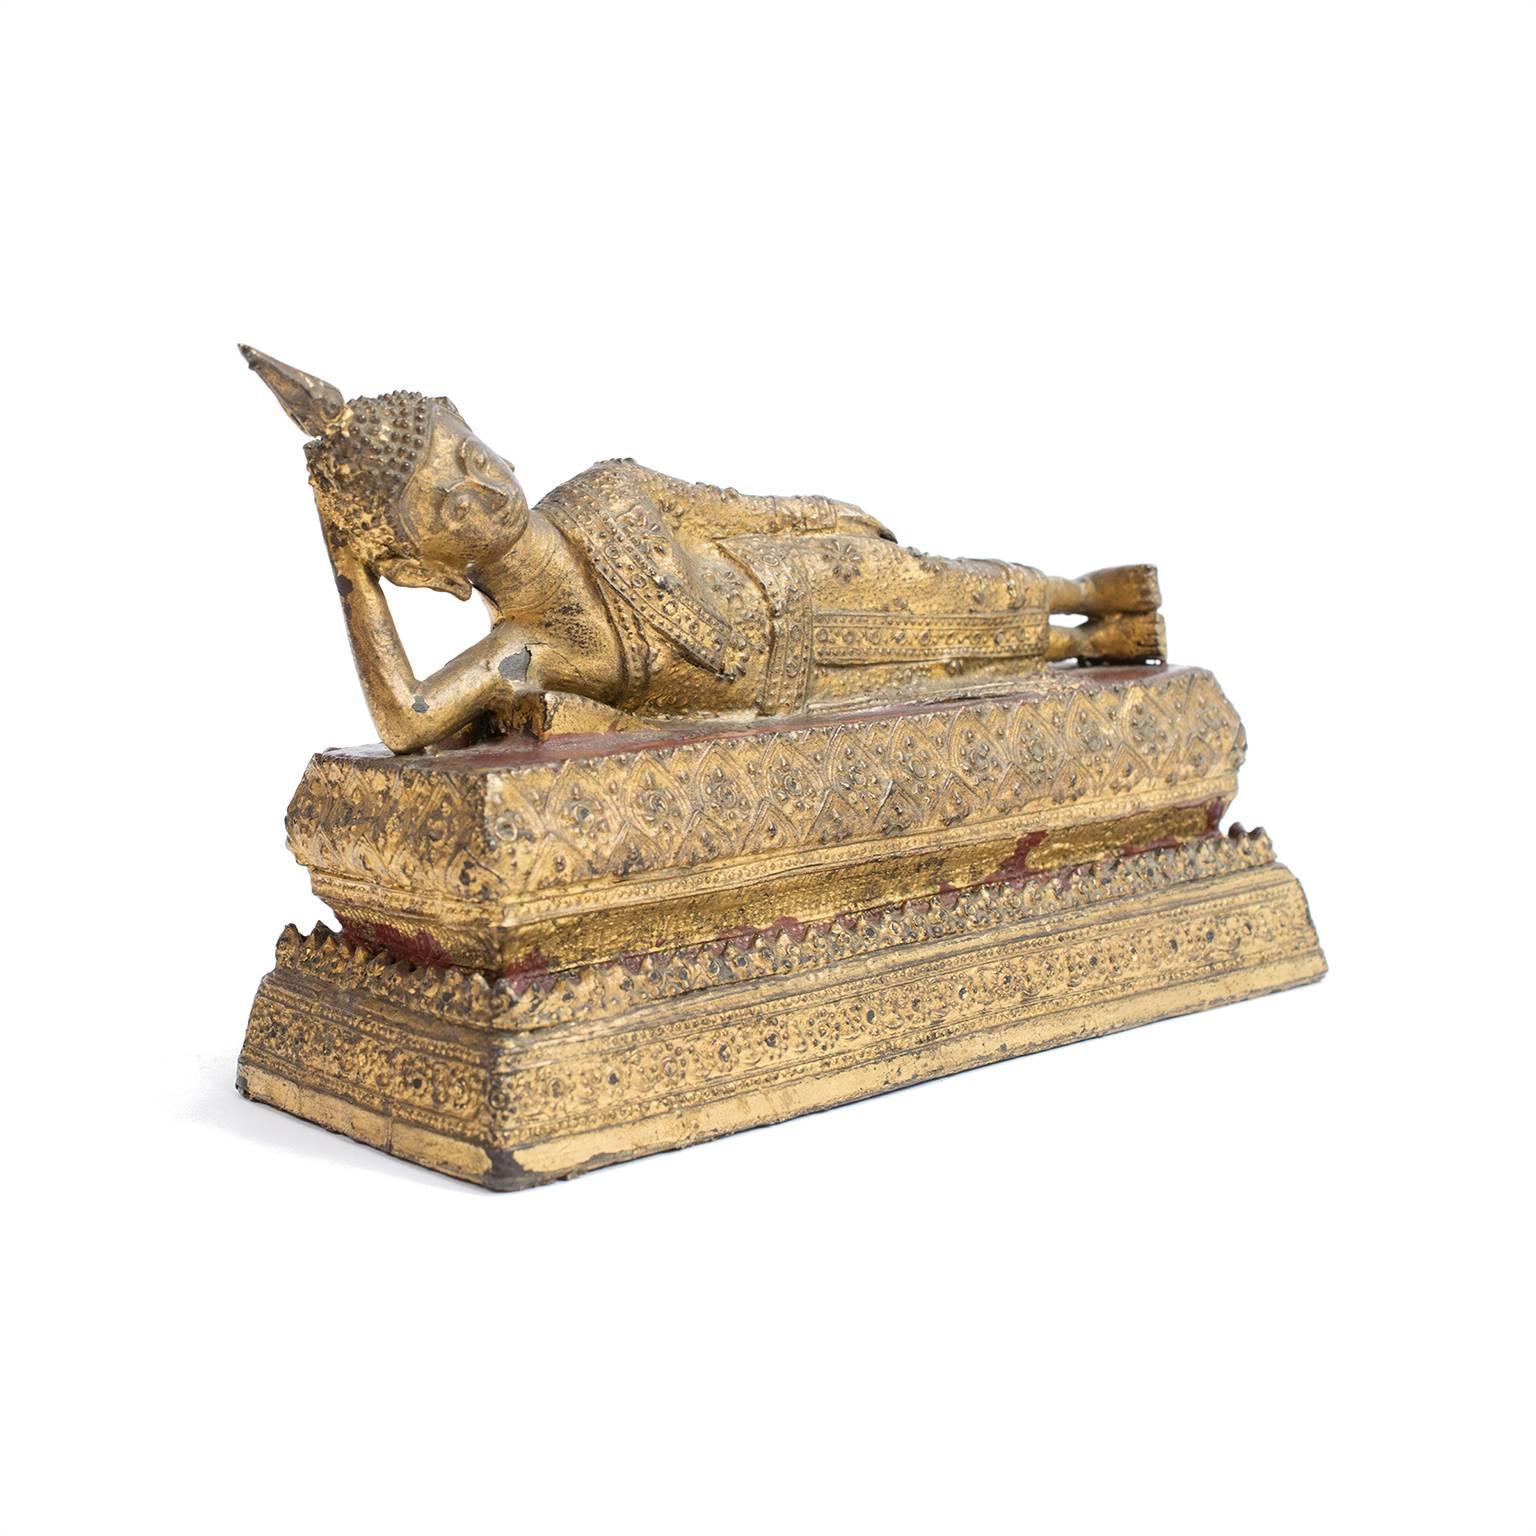 Statues of the Buddha show him either sitting, standing, or as with this gilt bronze figure from Thailand—reclining. When standing he is generally offering a blessing, if he is sitting he is often cross-legged and meditating, but the reclining